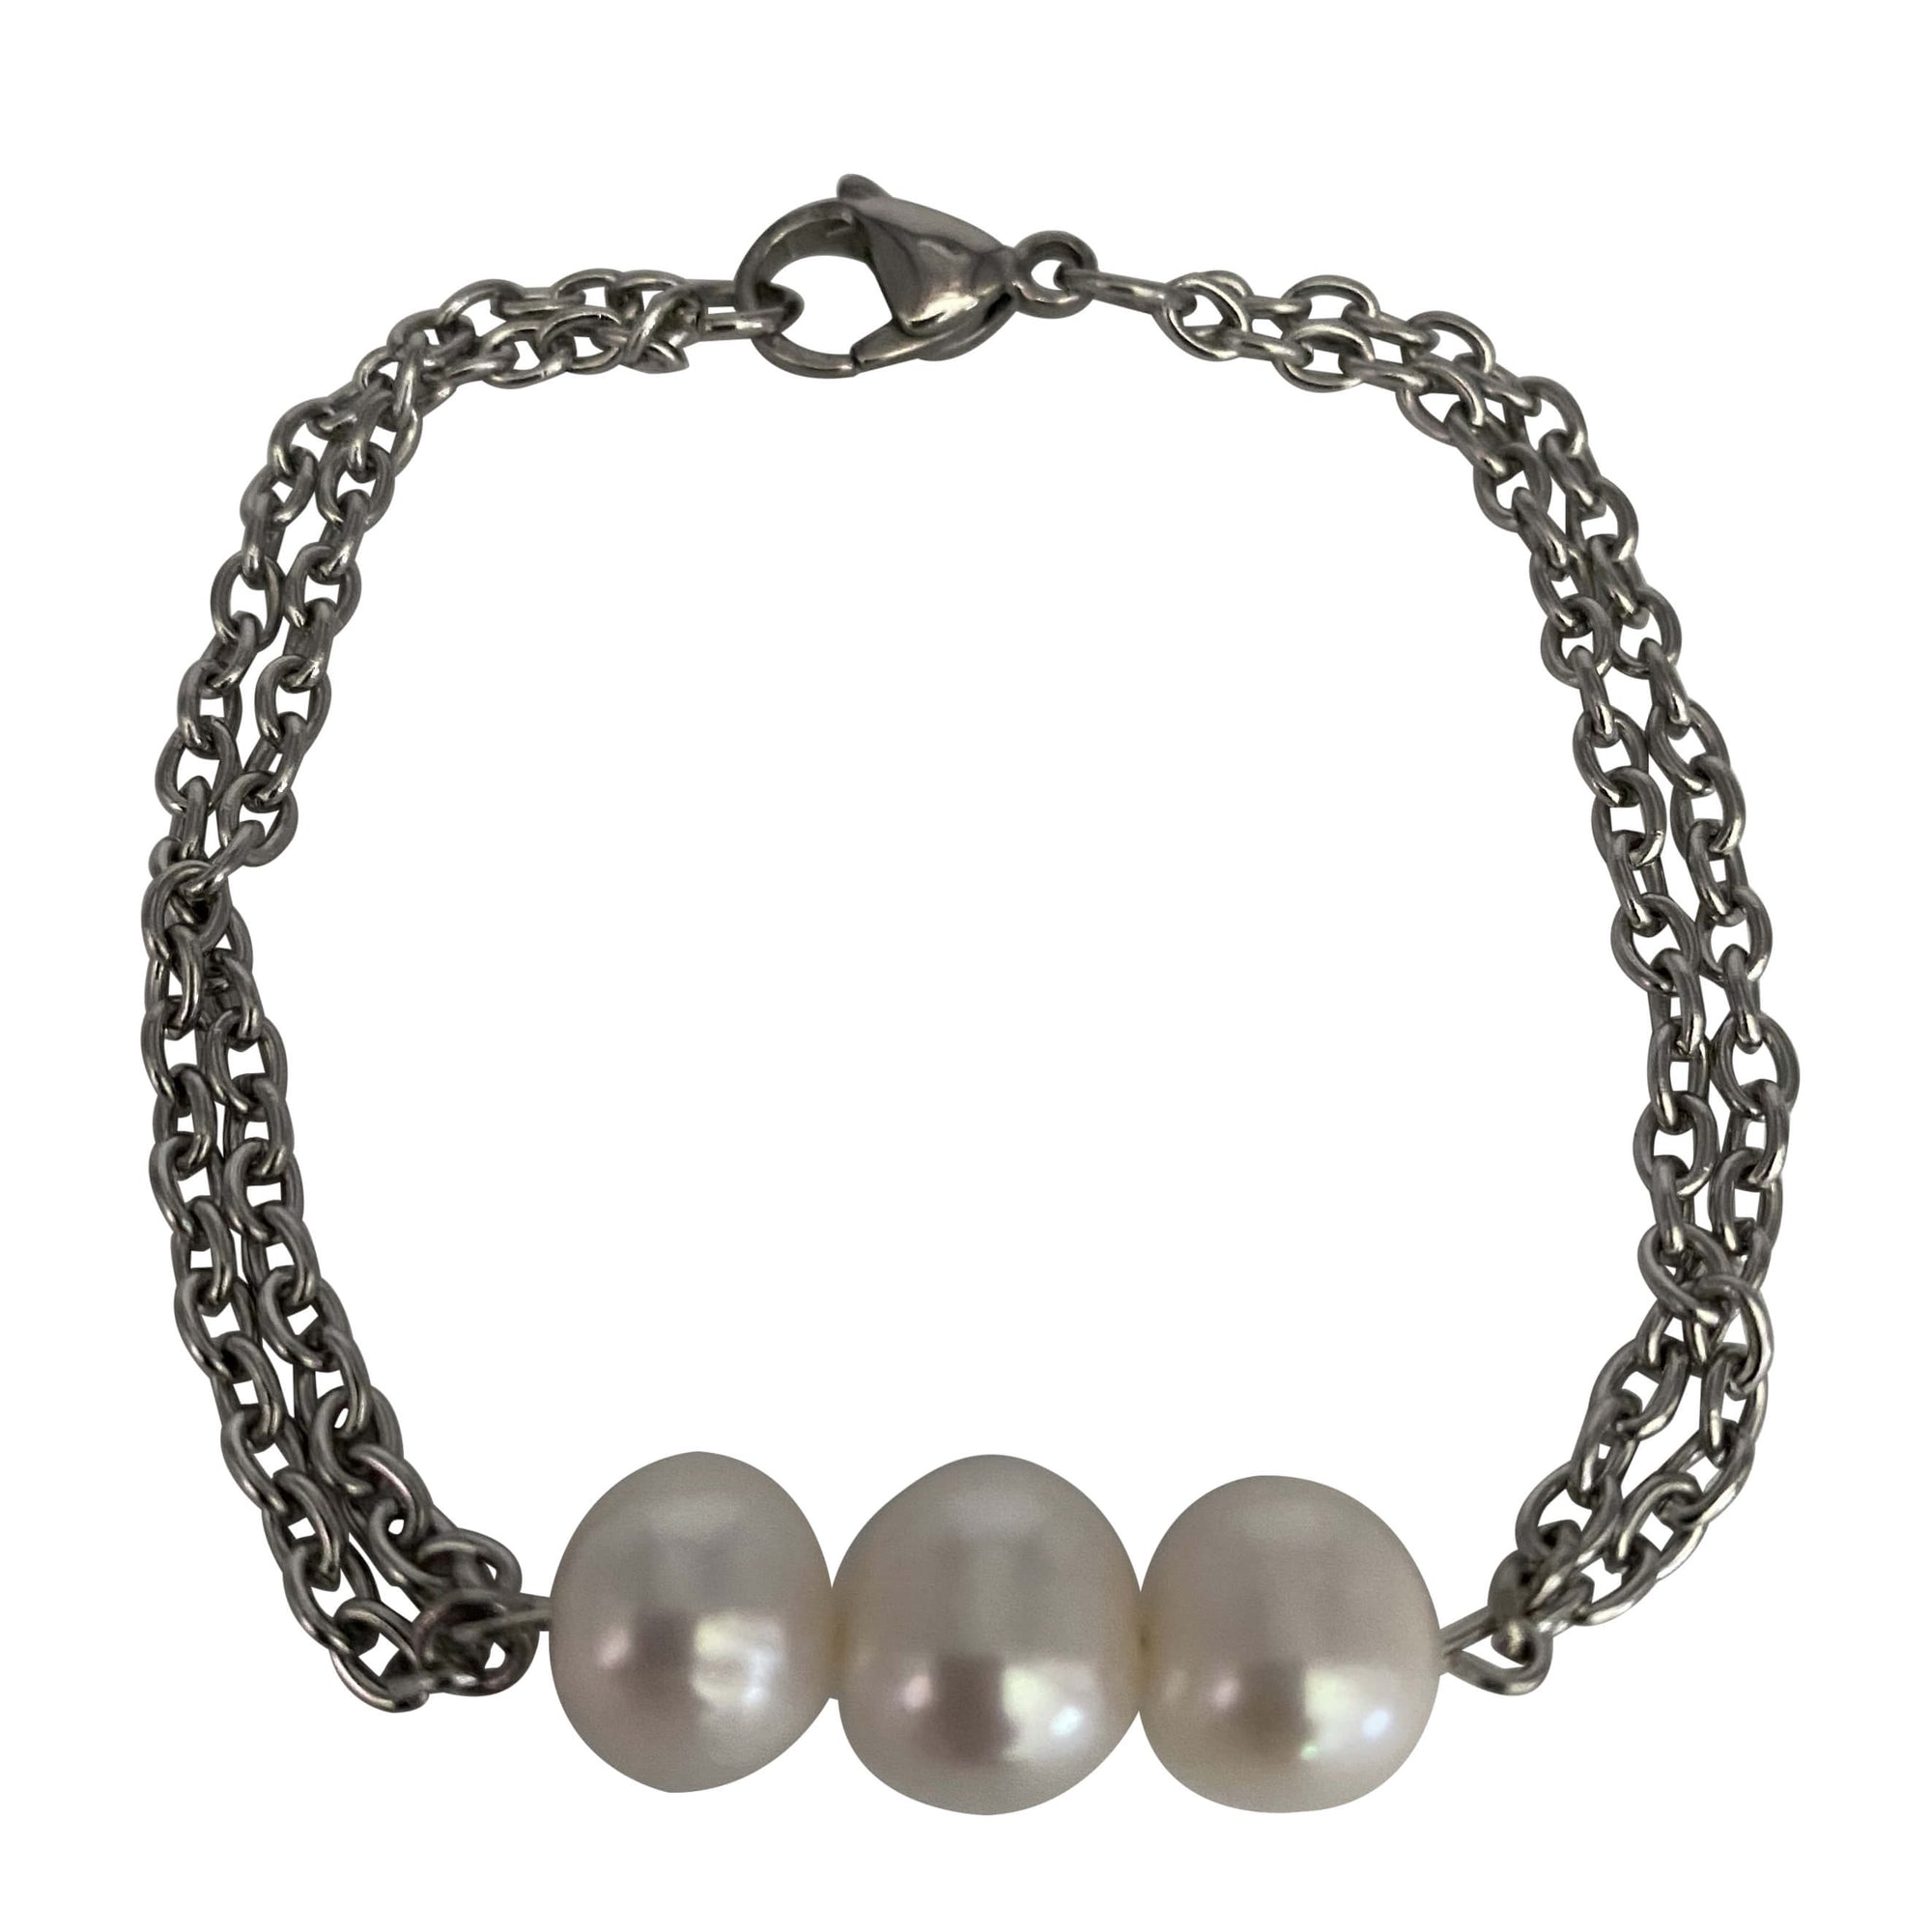 Three Freshwater Pearls Stainless Steel Chain Bracelet with Lobster Clasp-Bracelets- Creative Jewelry by Marcia